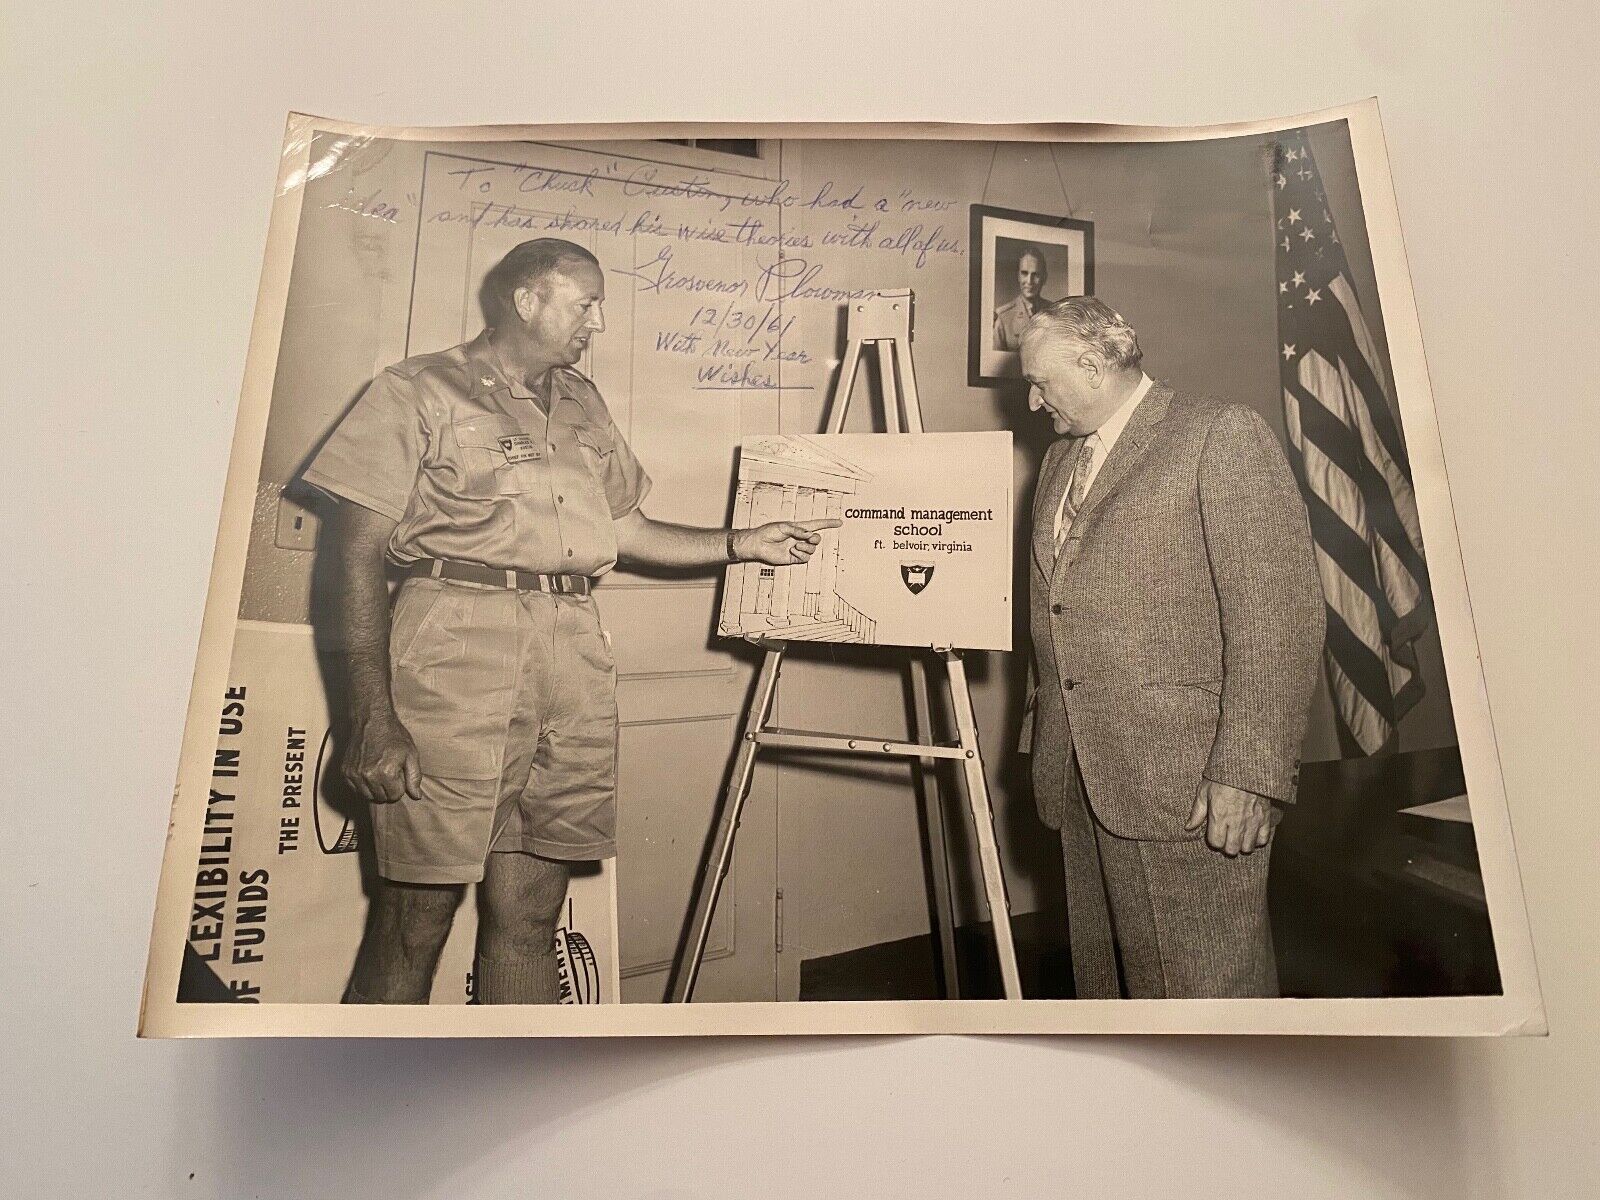 OA3) Official 1960s United States Army Photograph signed by E. Grosvenor Plowman